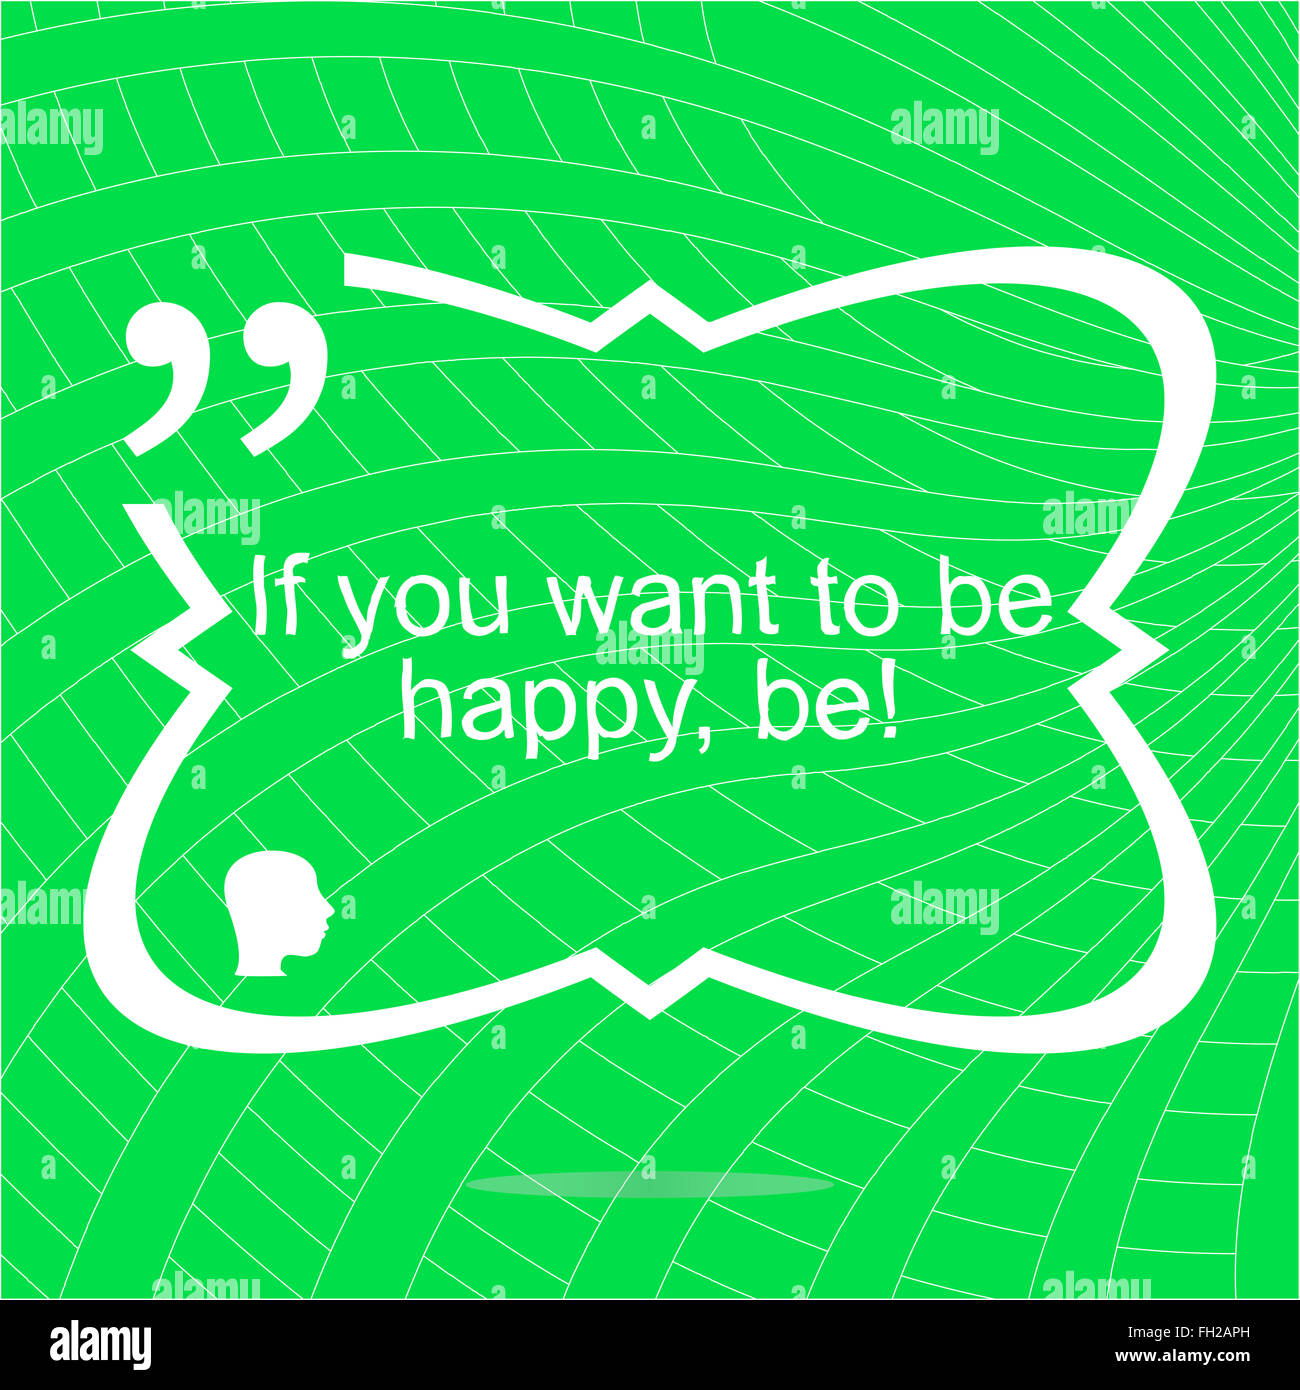 If you want to be happy - be. Inspirational motivational quote. Simple trendy design. Positive quote Stock Photo